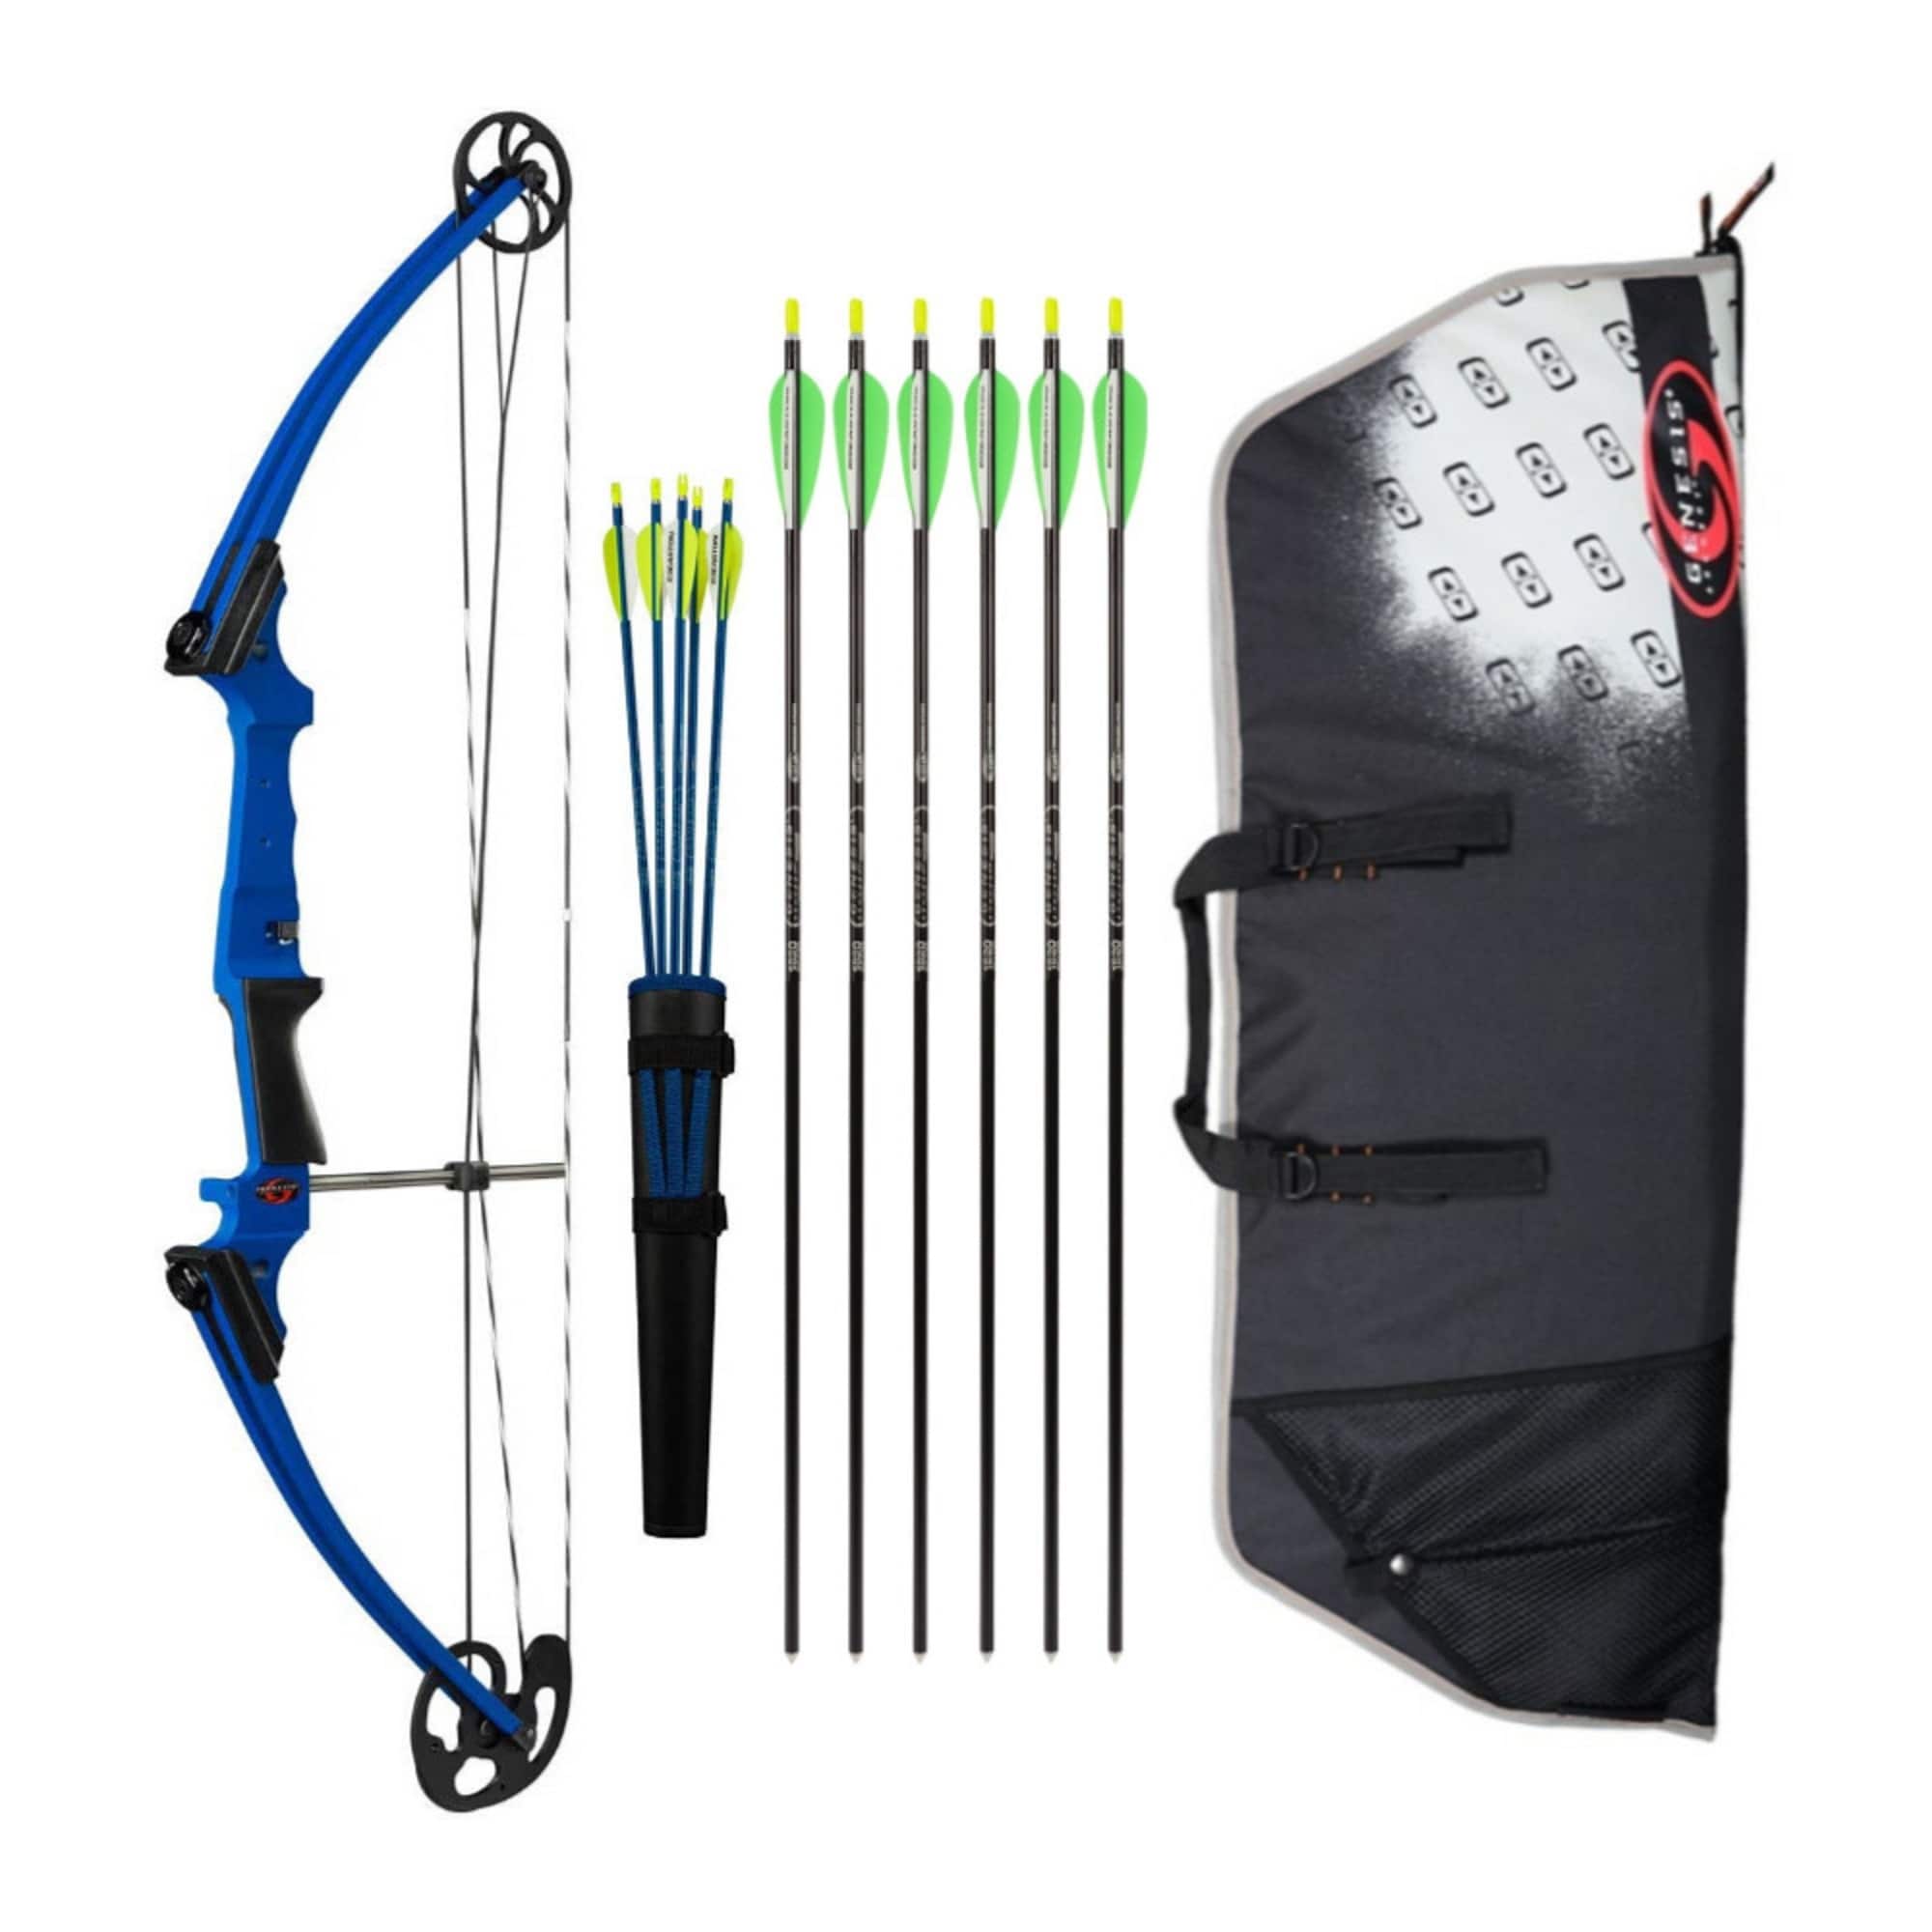 Genesis Archery Original Bow Kit (Right, Blue) with Case and 11